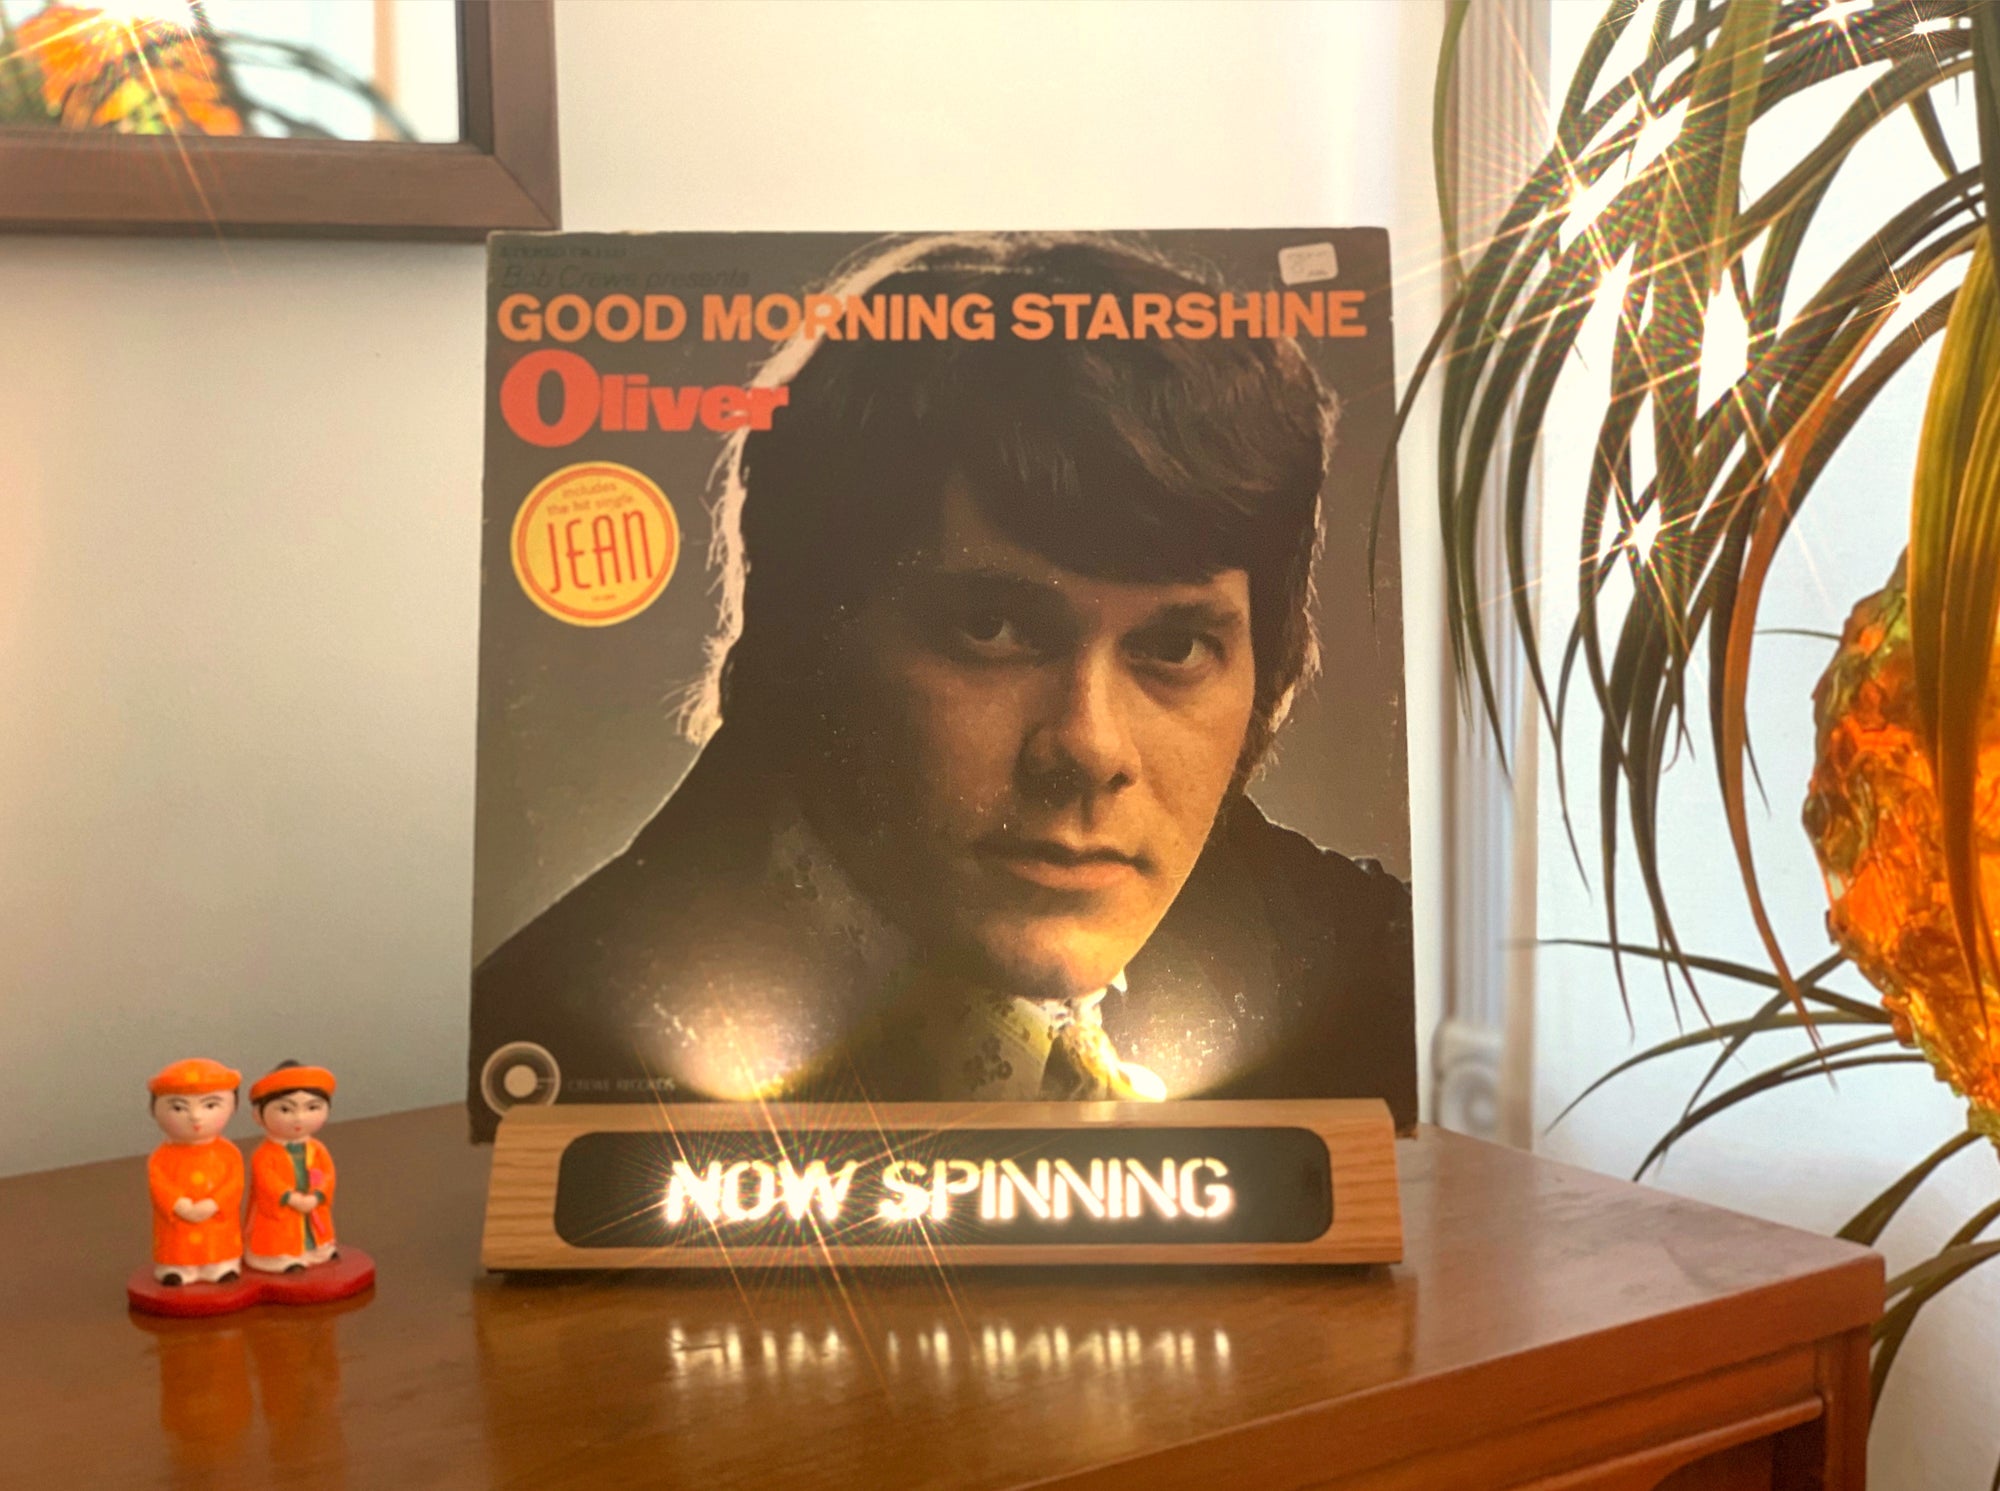 Vinyl-a-Day 25: Oliver - Good Morning Starshine (Crewe Records, 1969)